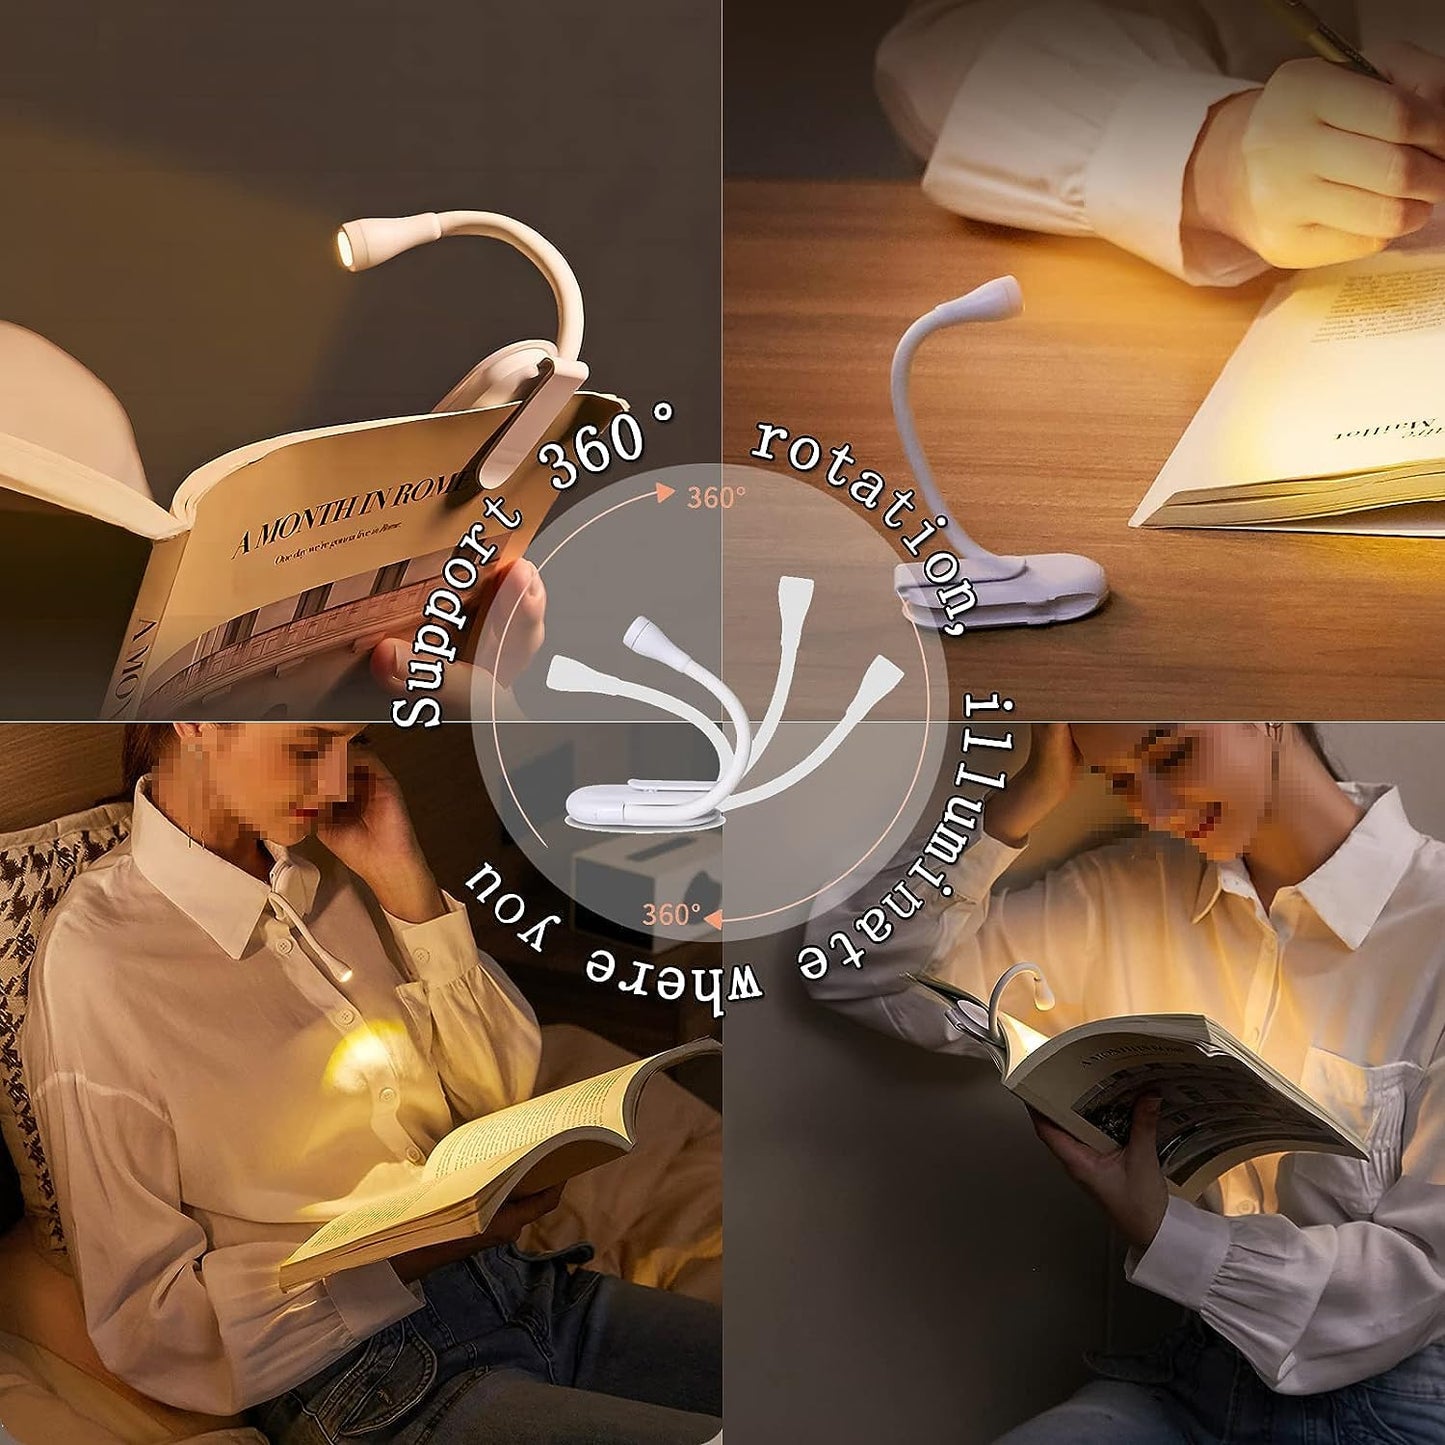 Book Light for Night Reading, Reading Light, Book Reading Light with Clip, Christmas Gifts, USB Rechargeable, 3 Modes, Portable, Eye Caring - White